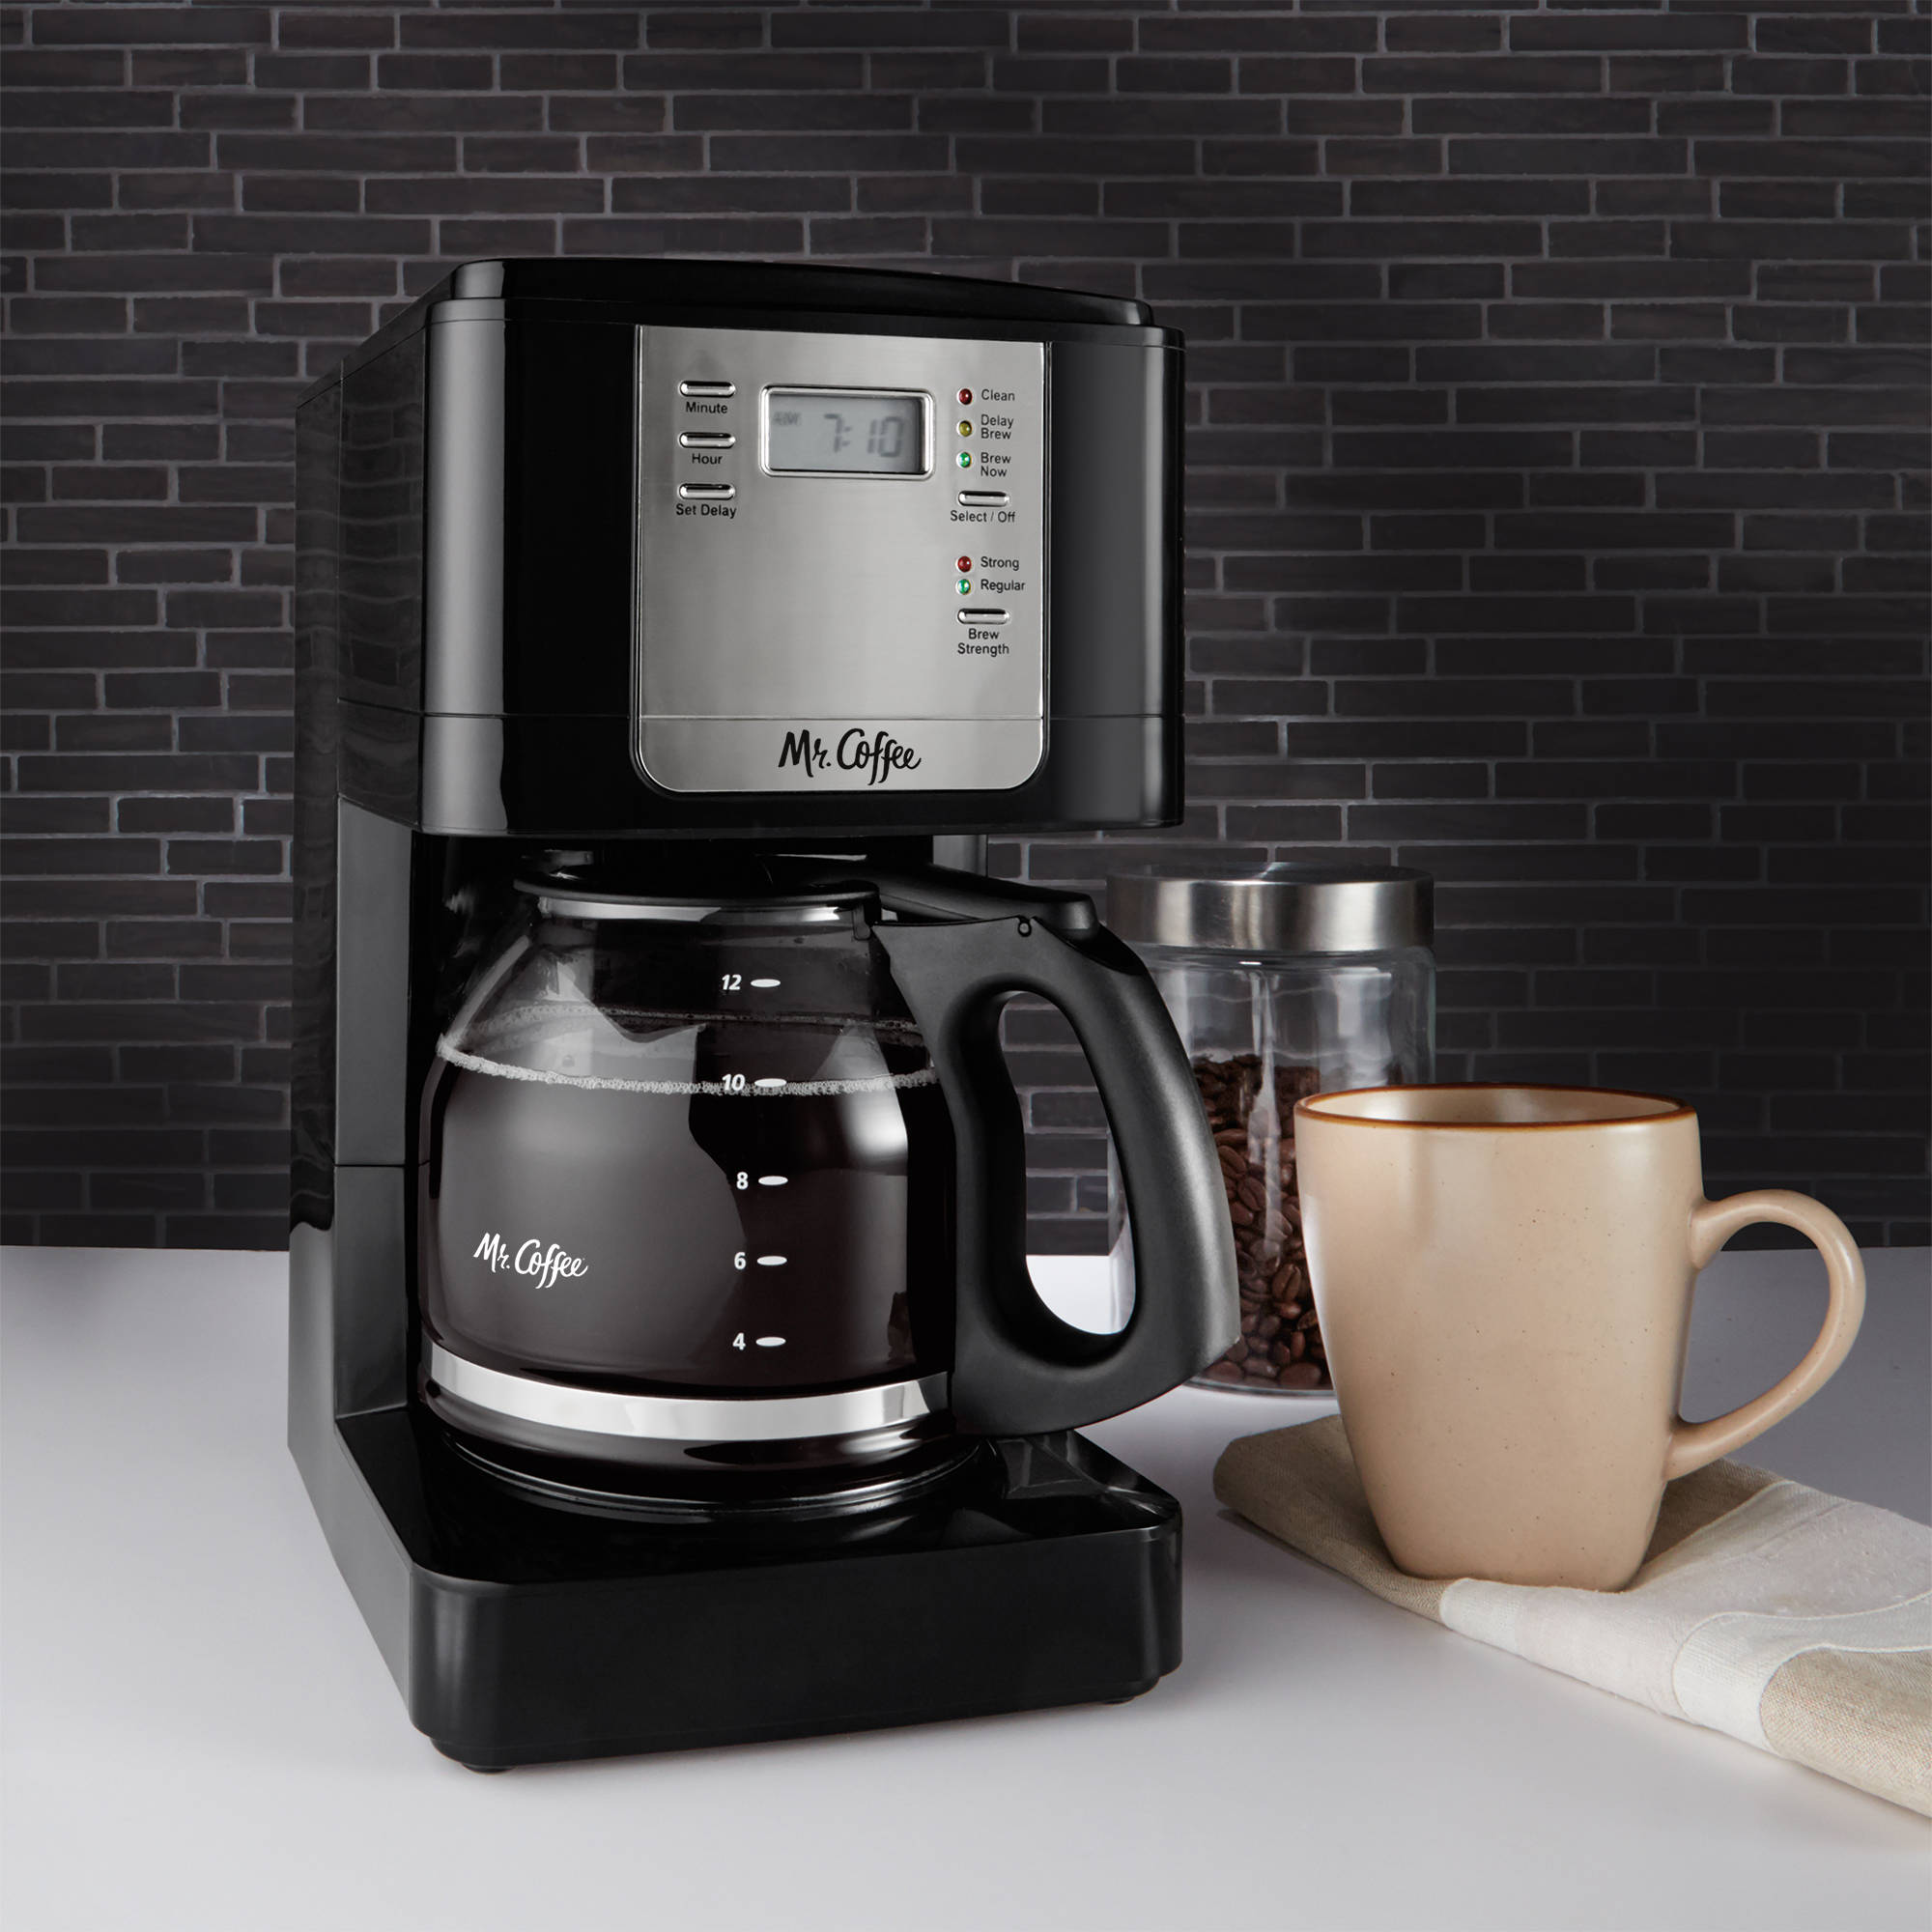 Mr. Coffee Advanced Brew 12 Cup Programmable Black Coffee Maker - image 2 of 2